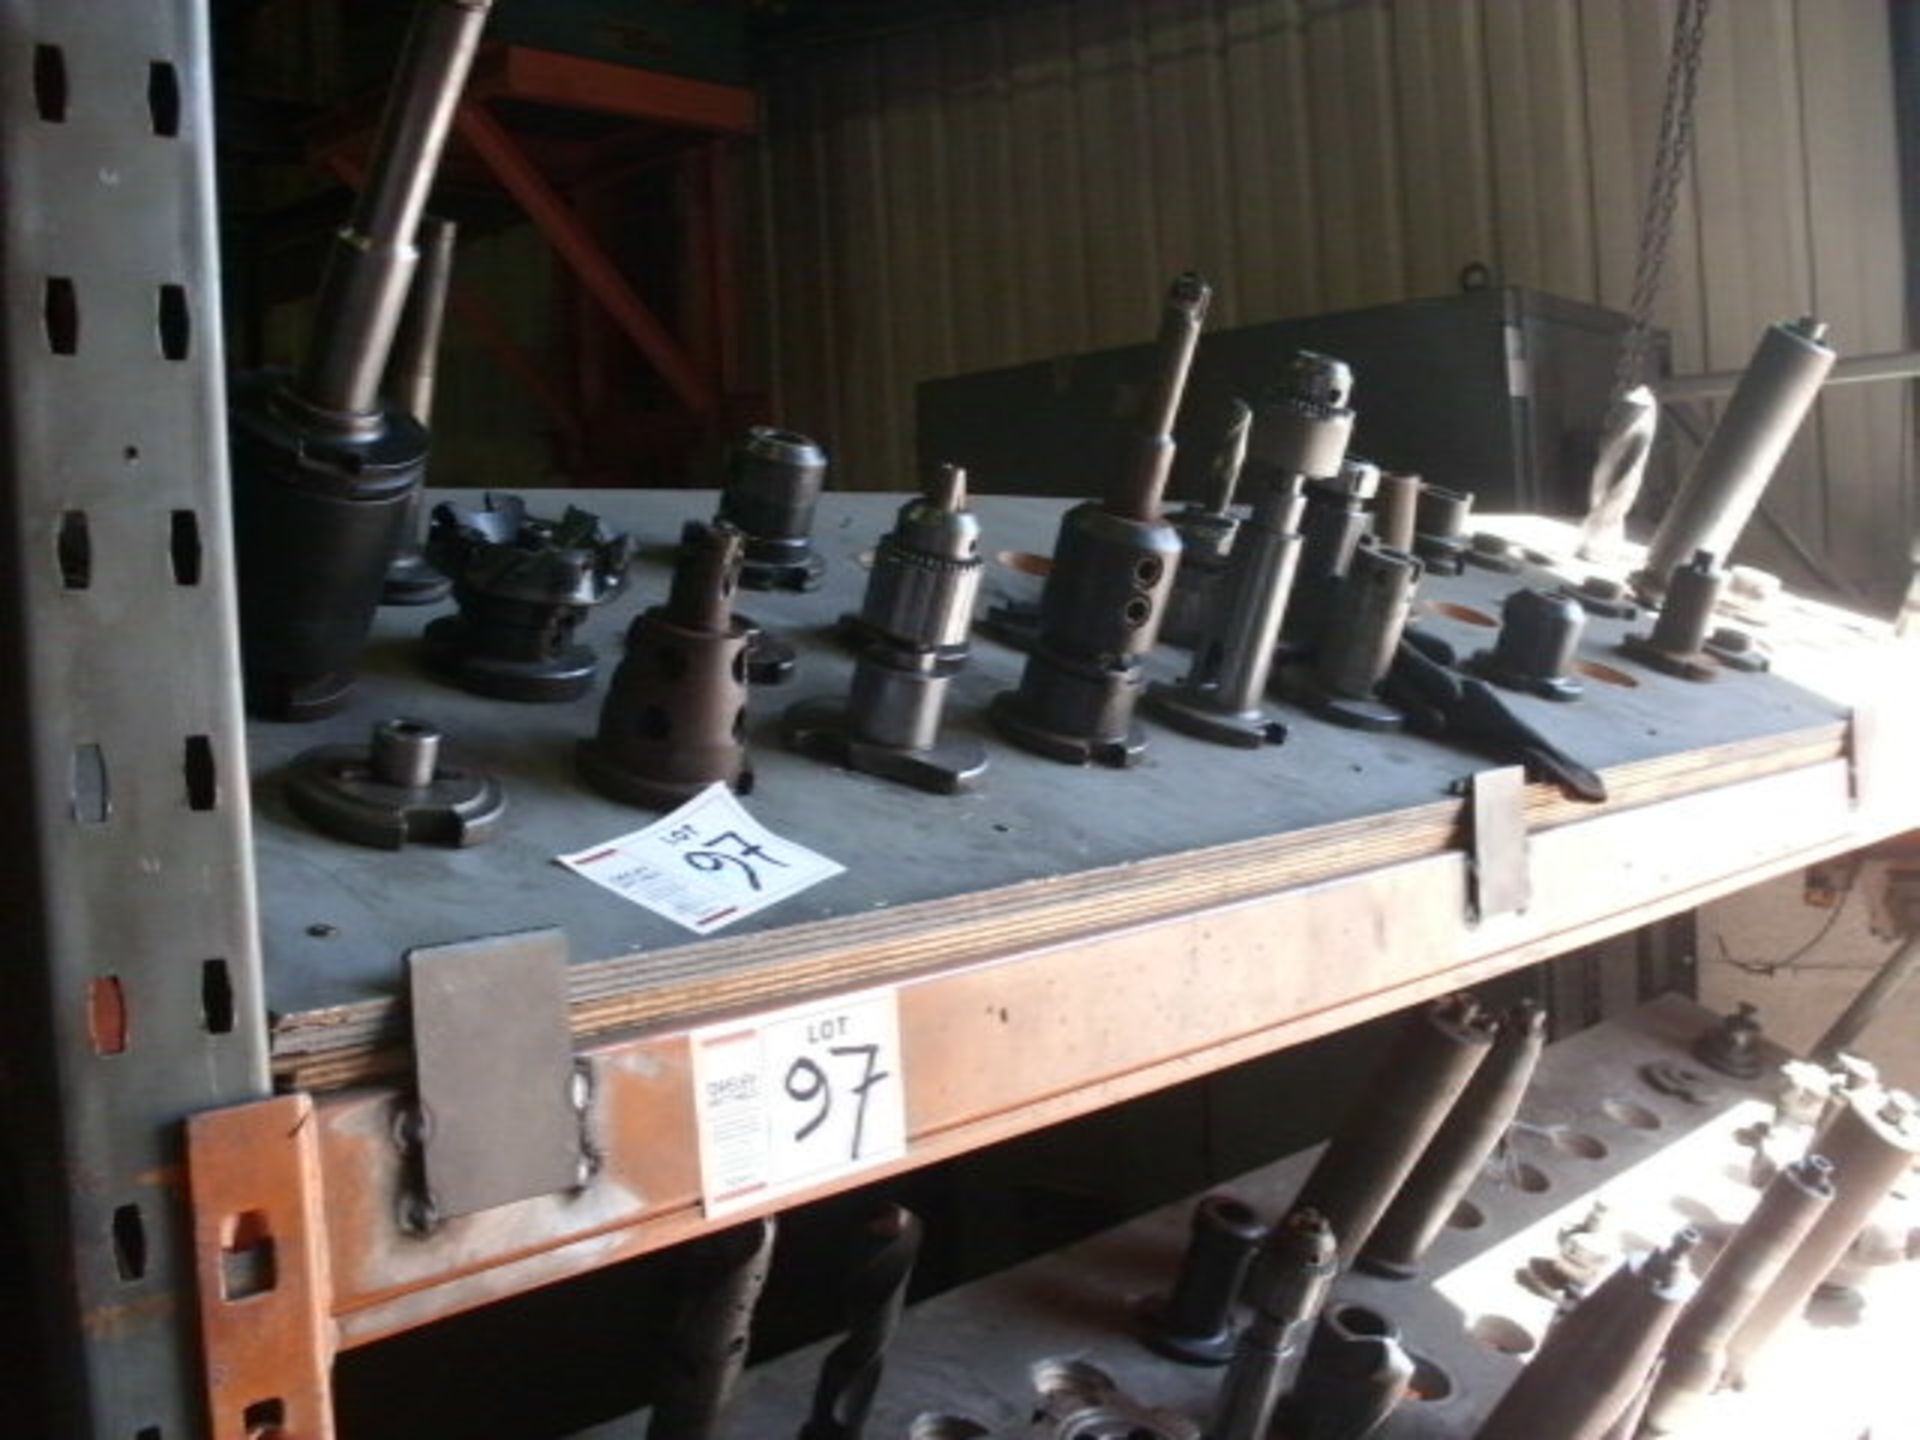 RACKING & CONTENTS including extension tool holders, various cutters, face mills and chucks